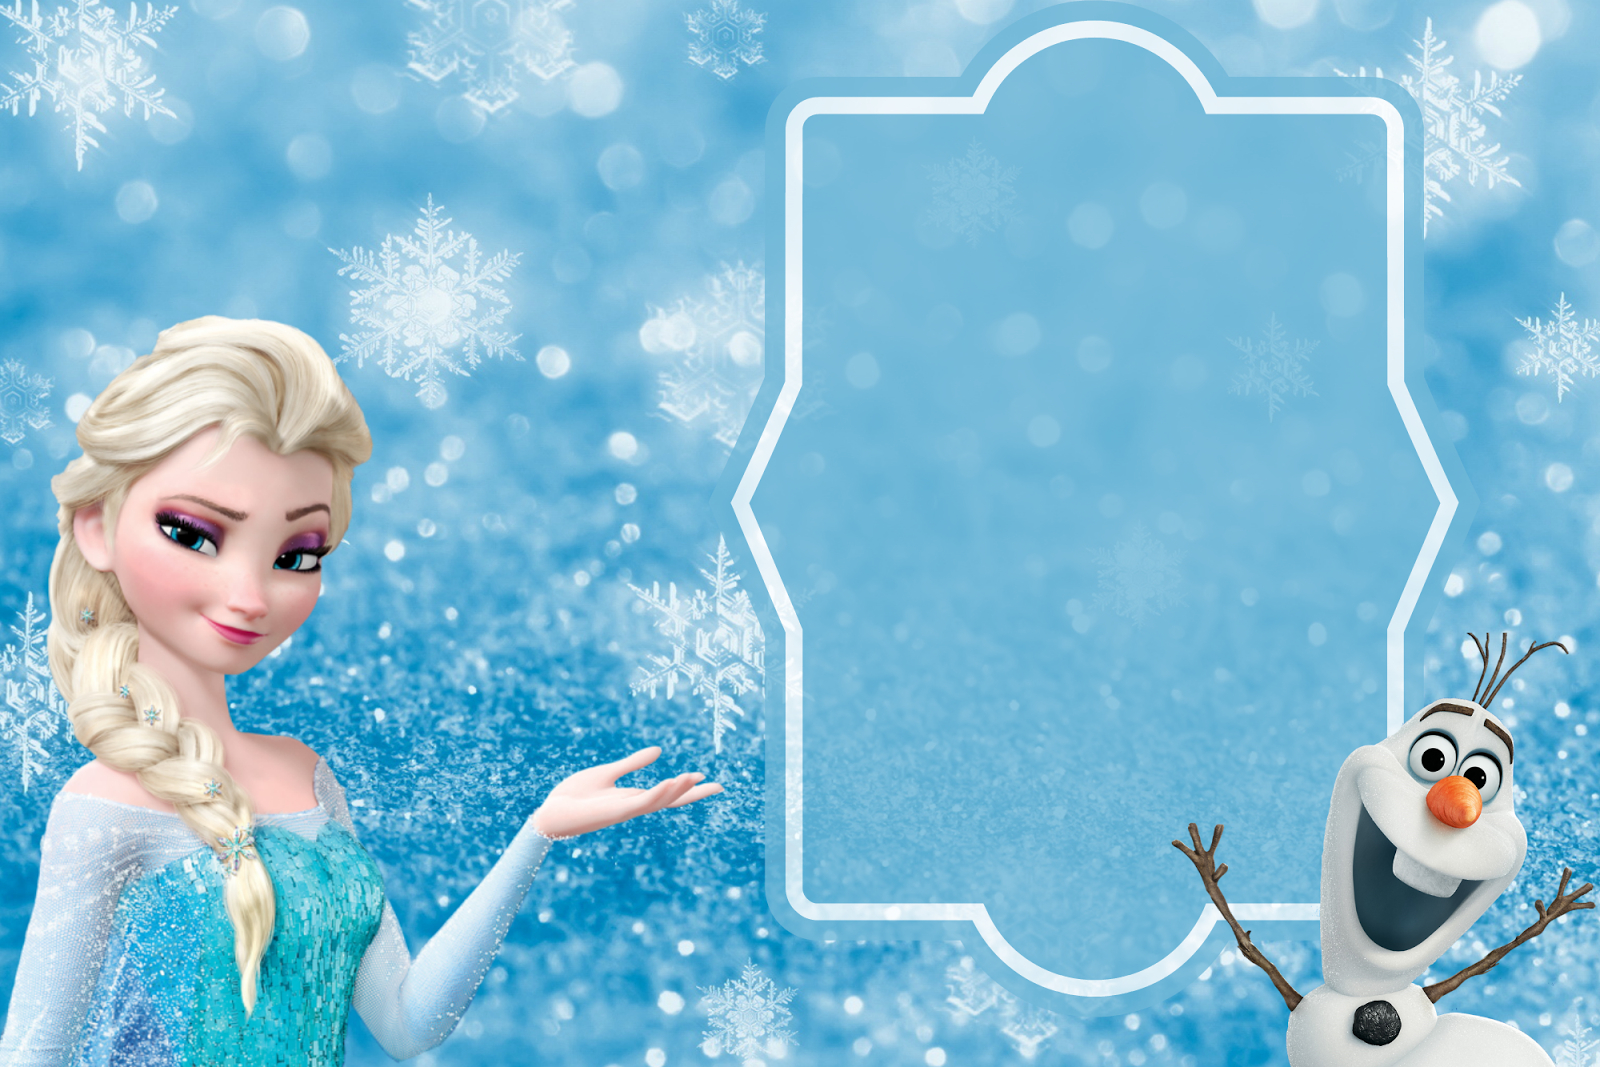 Free Frozen Party Invitation Template Download + Party Ideas Regarding Frozen Birthday Card Template